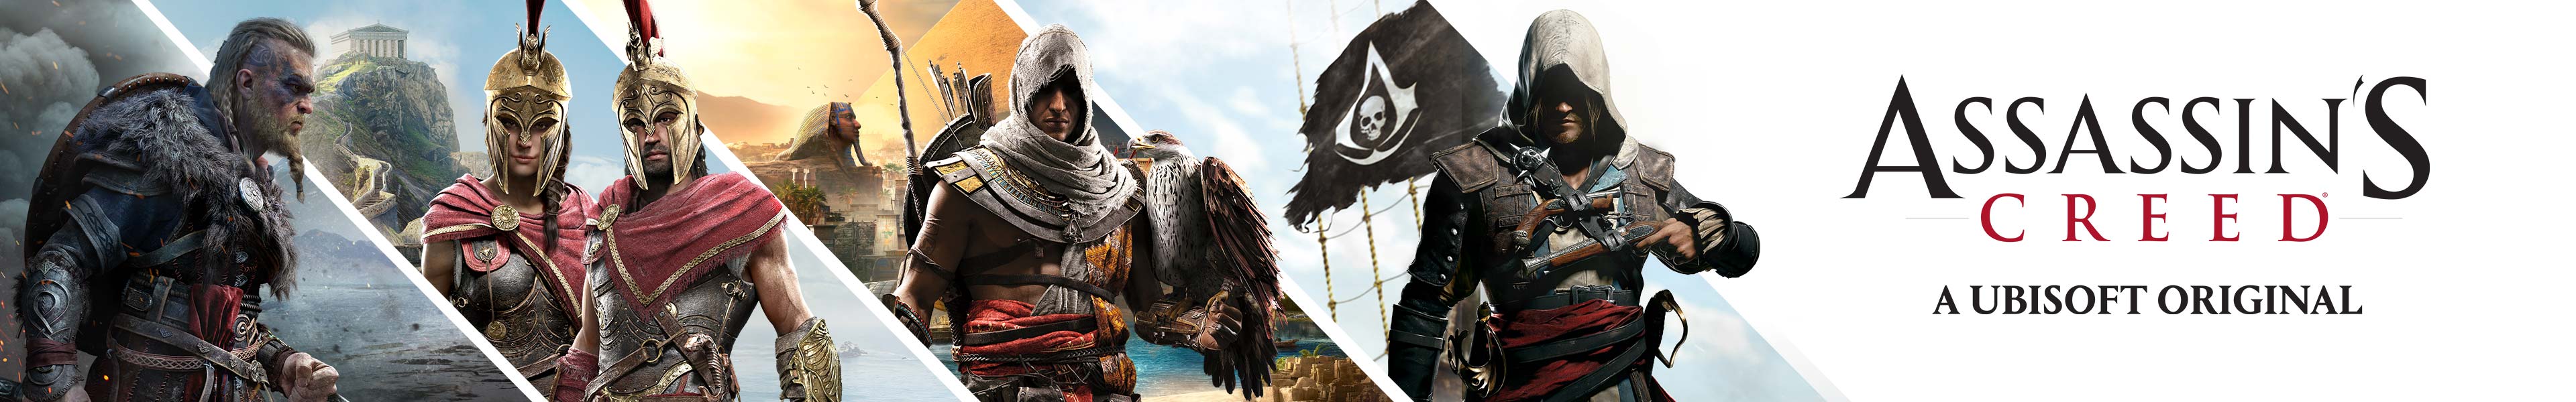 AC Franchise Category banner